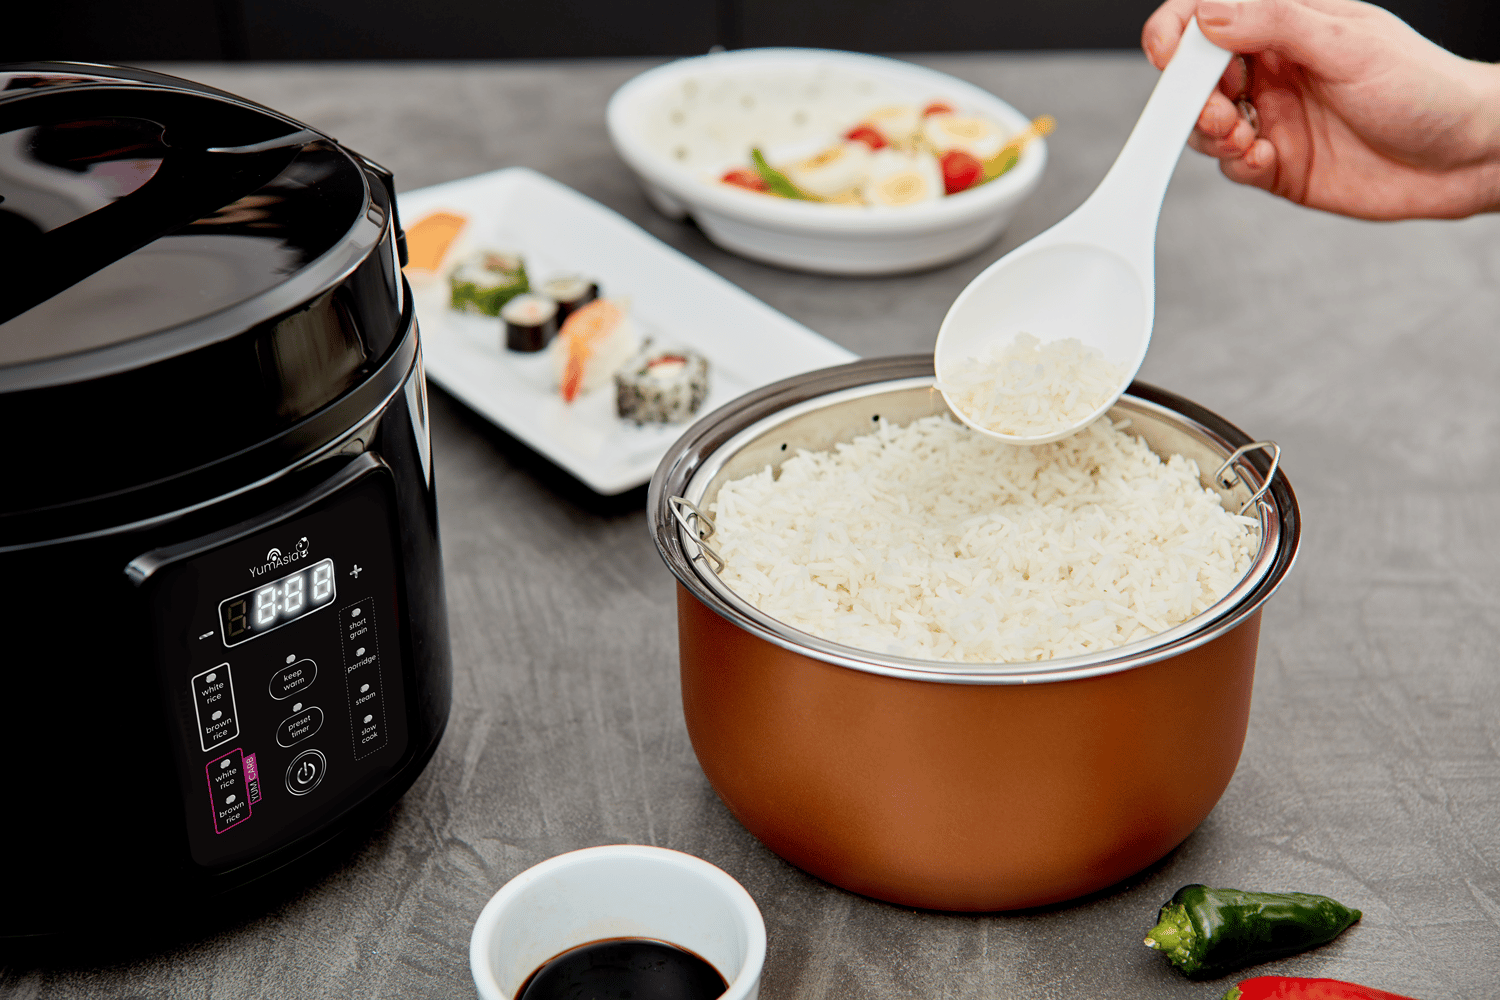 https://yum-asia.com/us/wp-content/uploads/sites/2/2022/02/dark-kumo-side-on-with-rice-lift.png